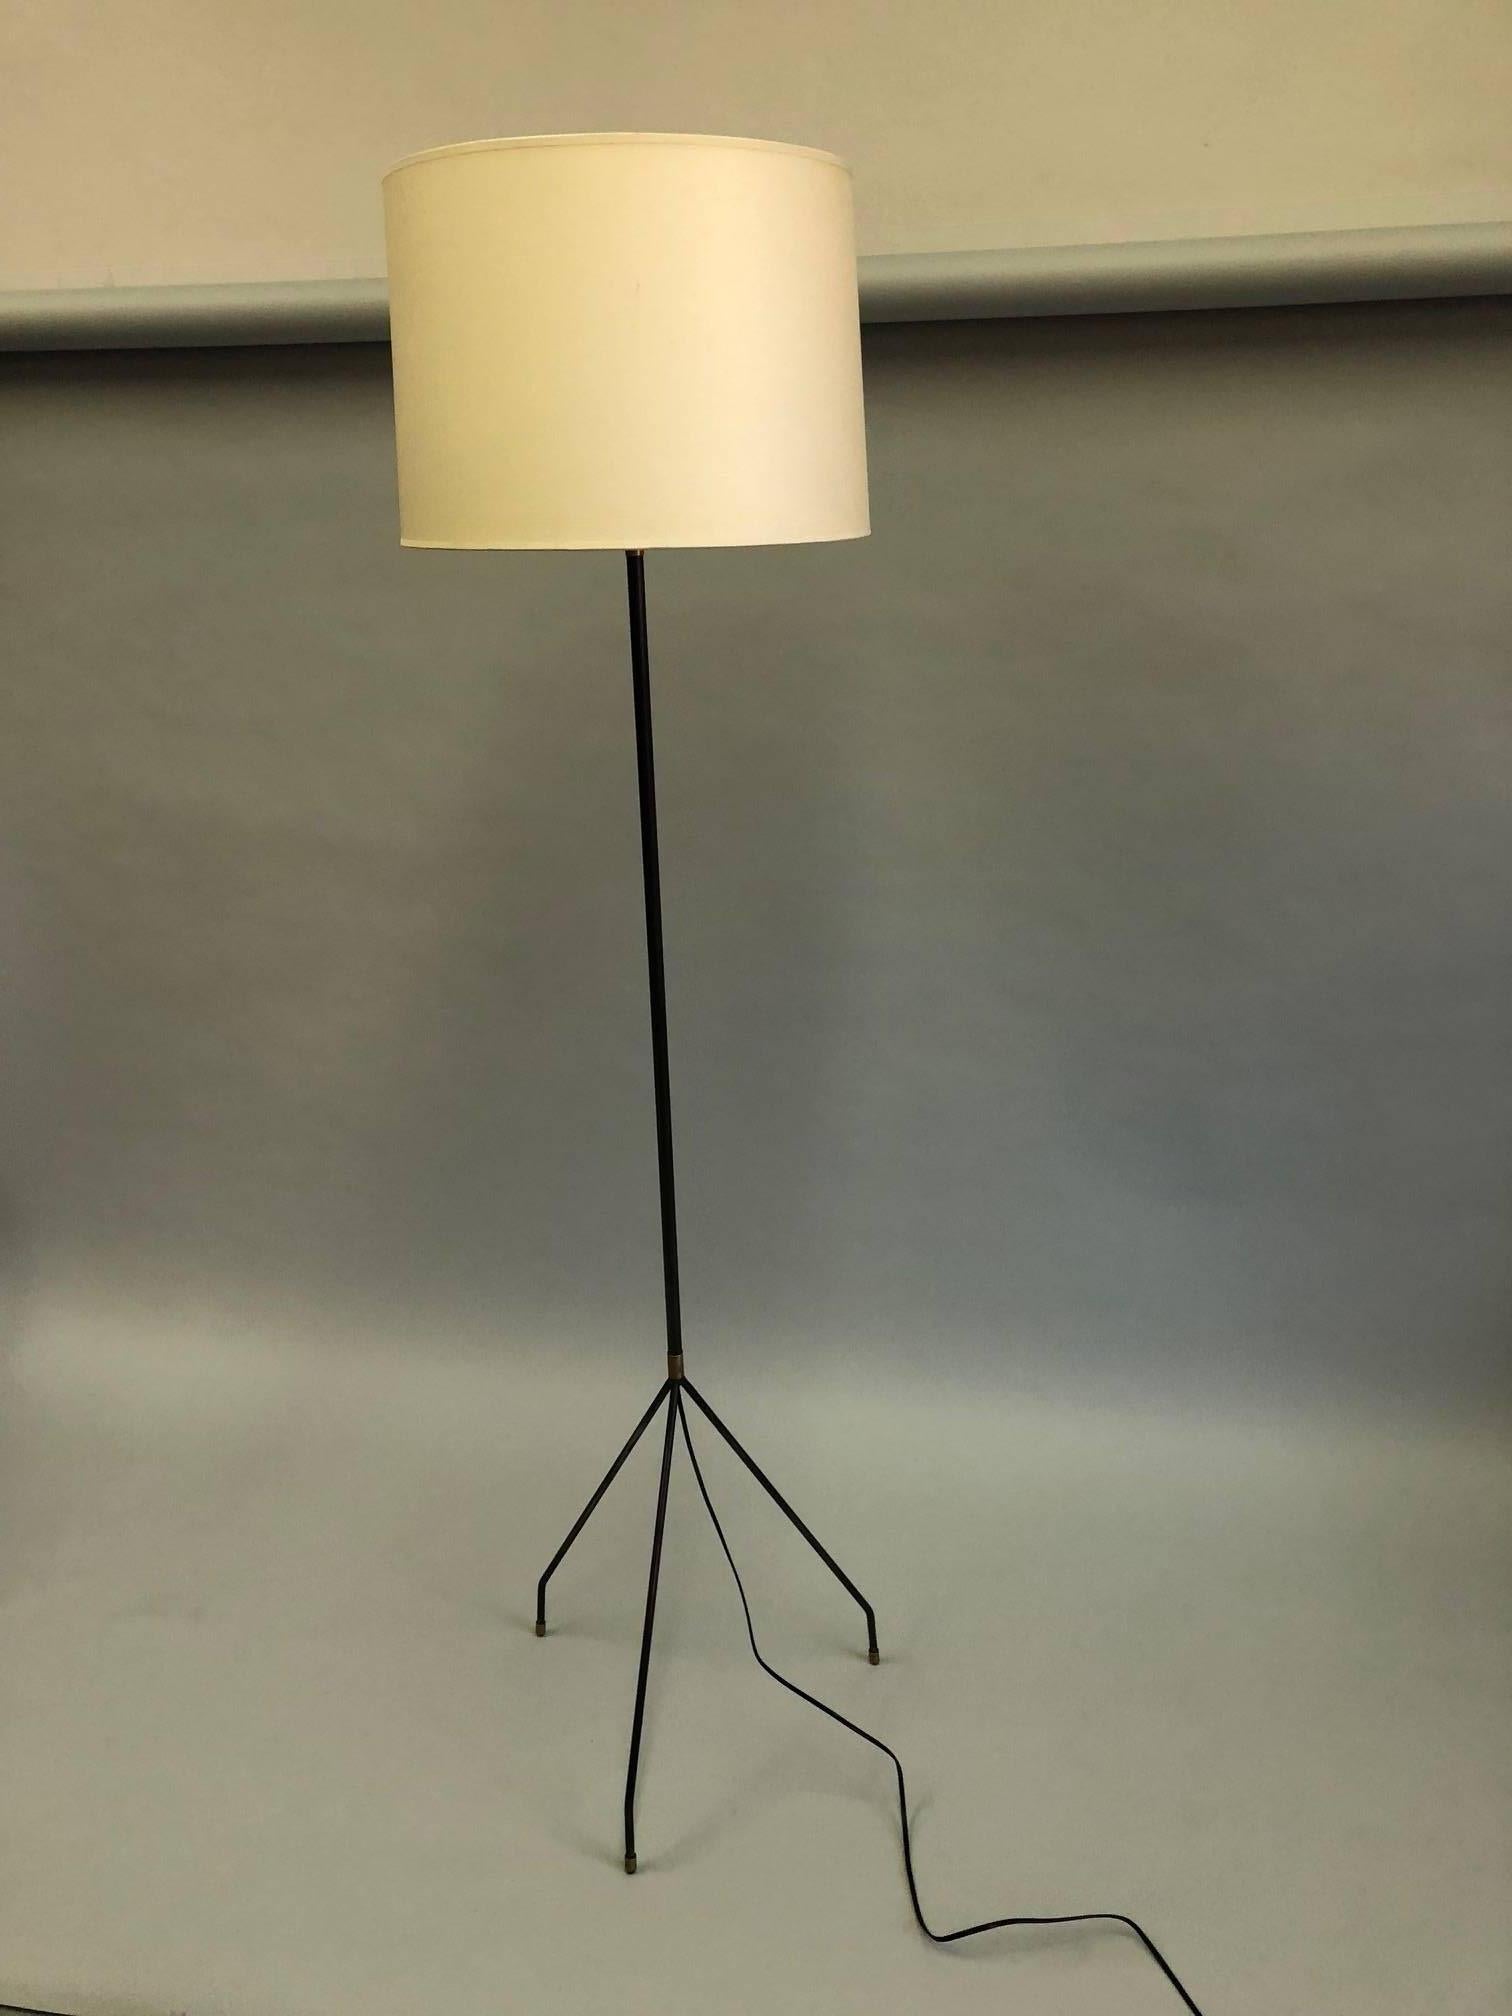 Elegant, sleek pair of French Mid-Century Modern Style hand wrought iron floor lamps in the style of Pierre Guariche and Disderot. The standing lamps are delicately conceived in a Minimalist style with a slender iron stem that parts into a tripod